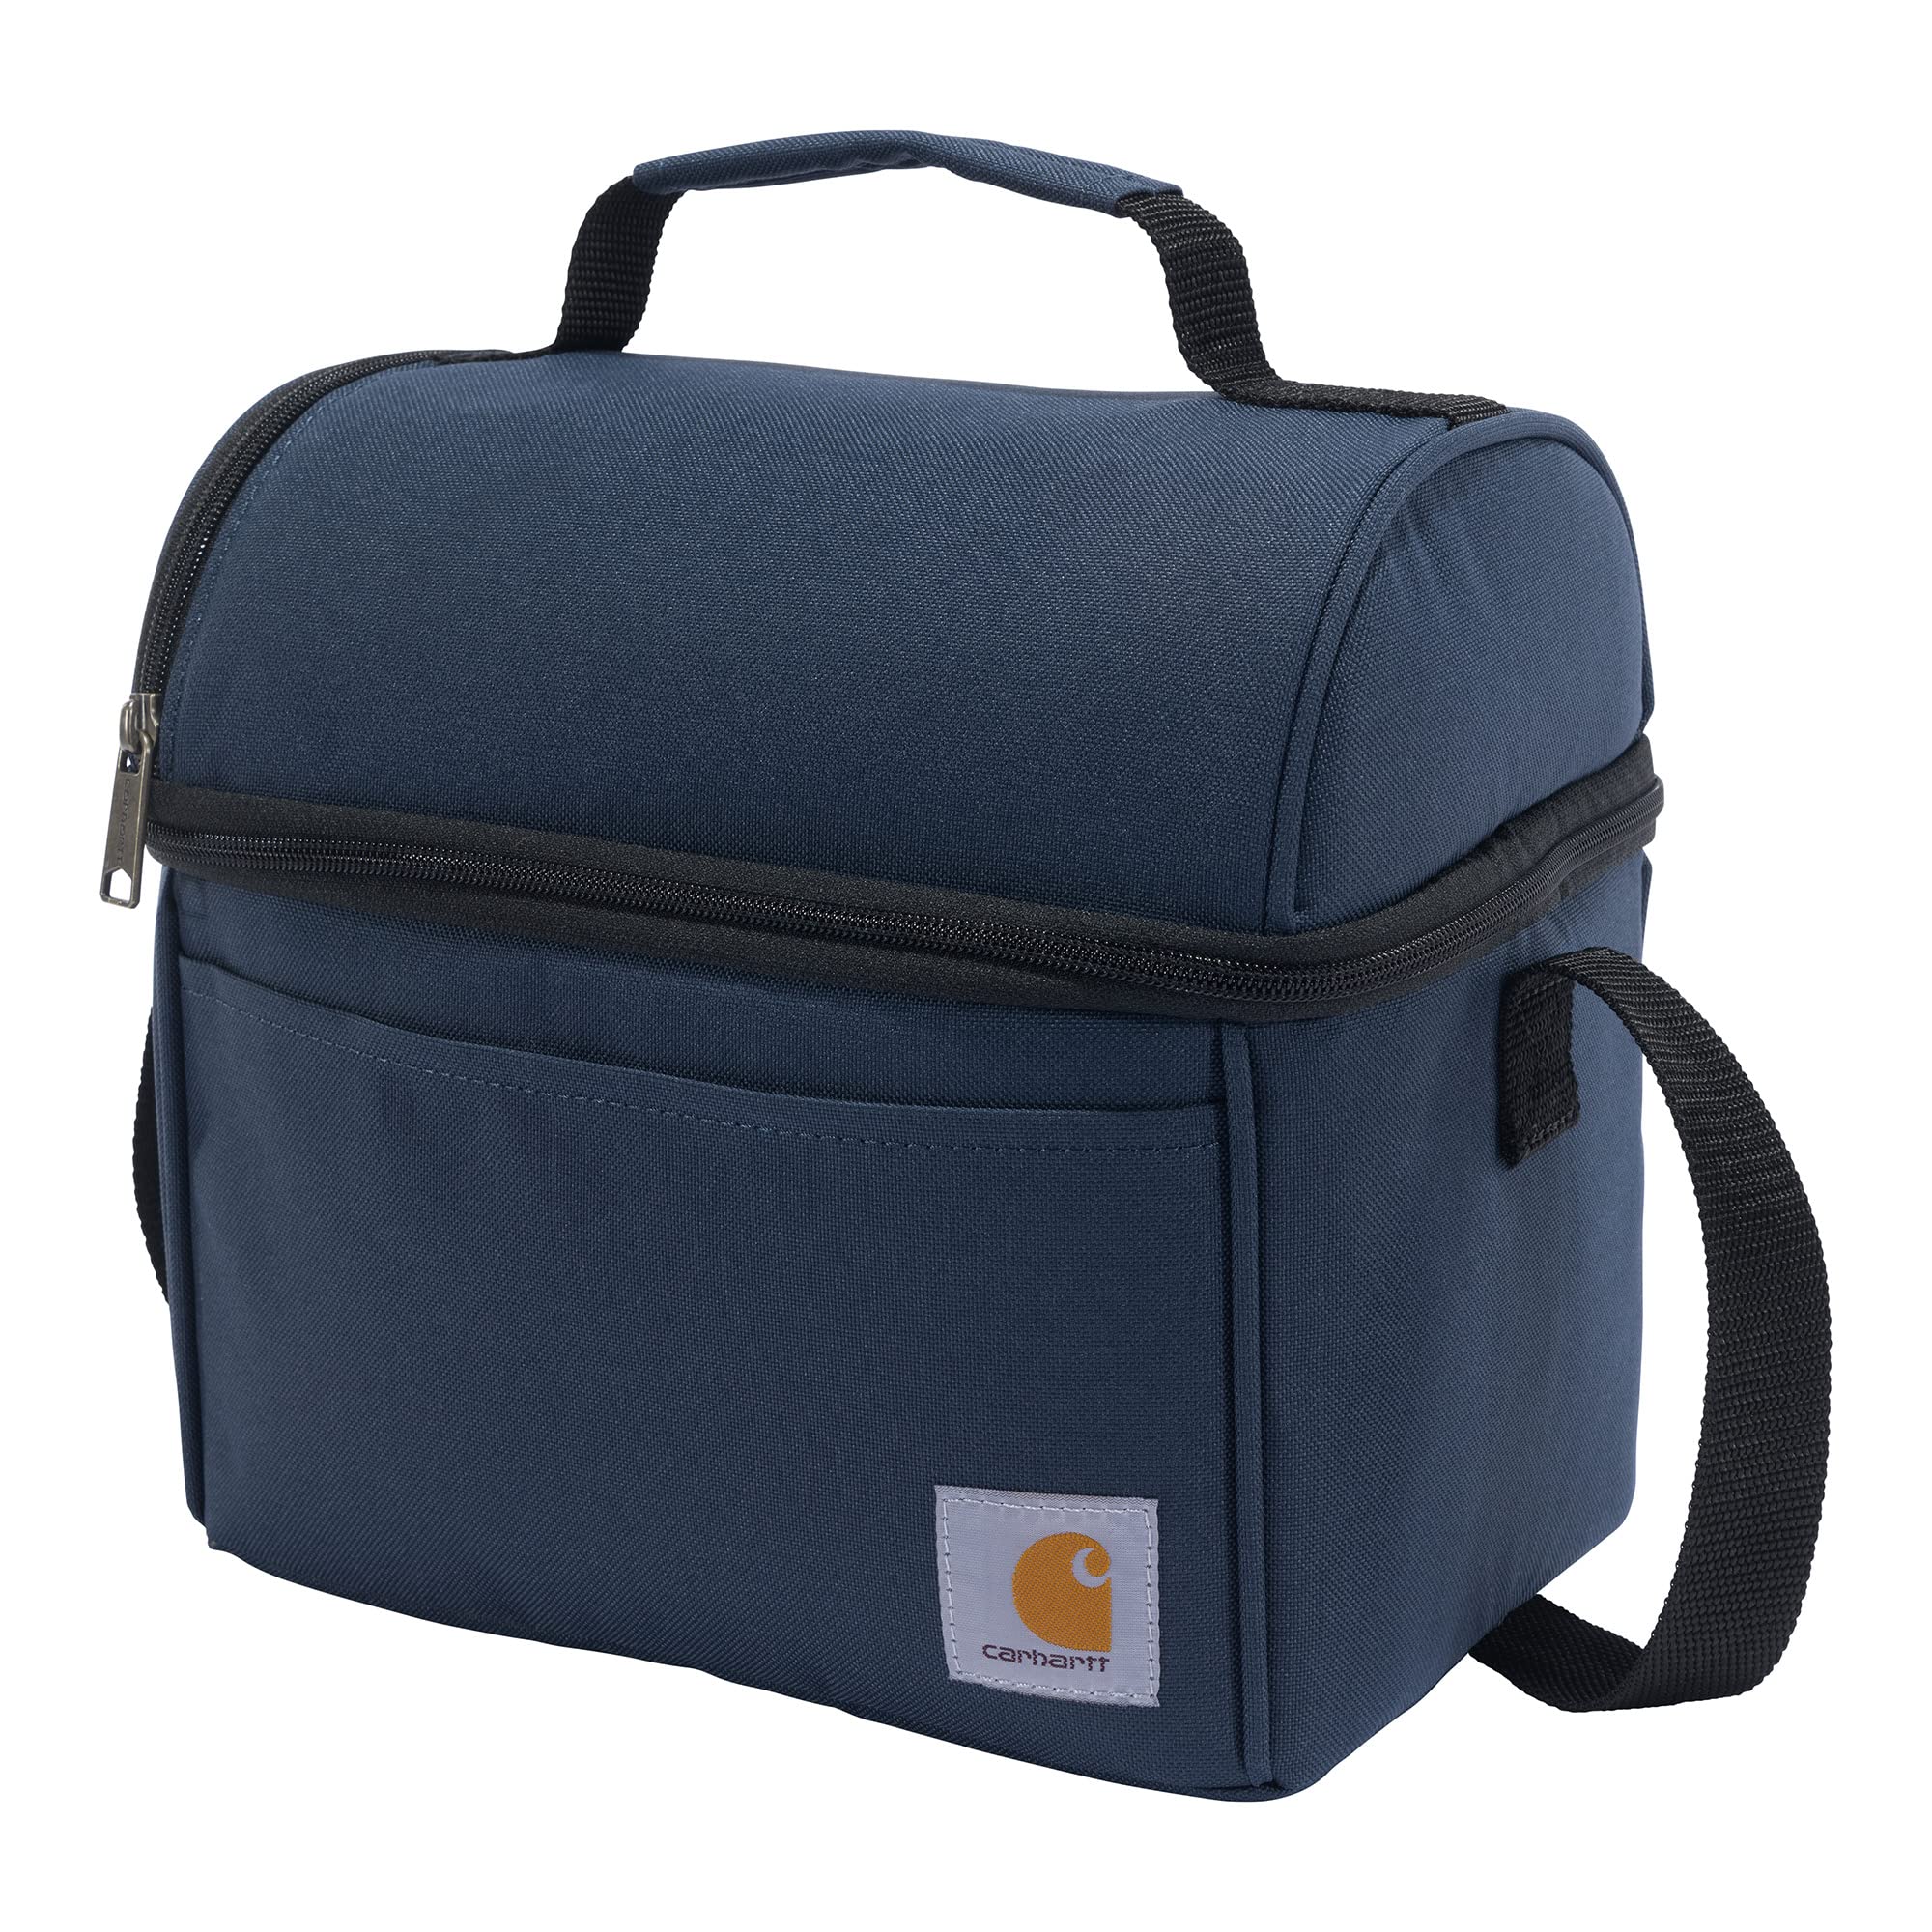 Carhartt Deluxe Dual Compartment Insulated Lunch Cooler Bag, Navy - image 2 of 7